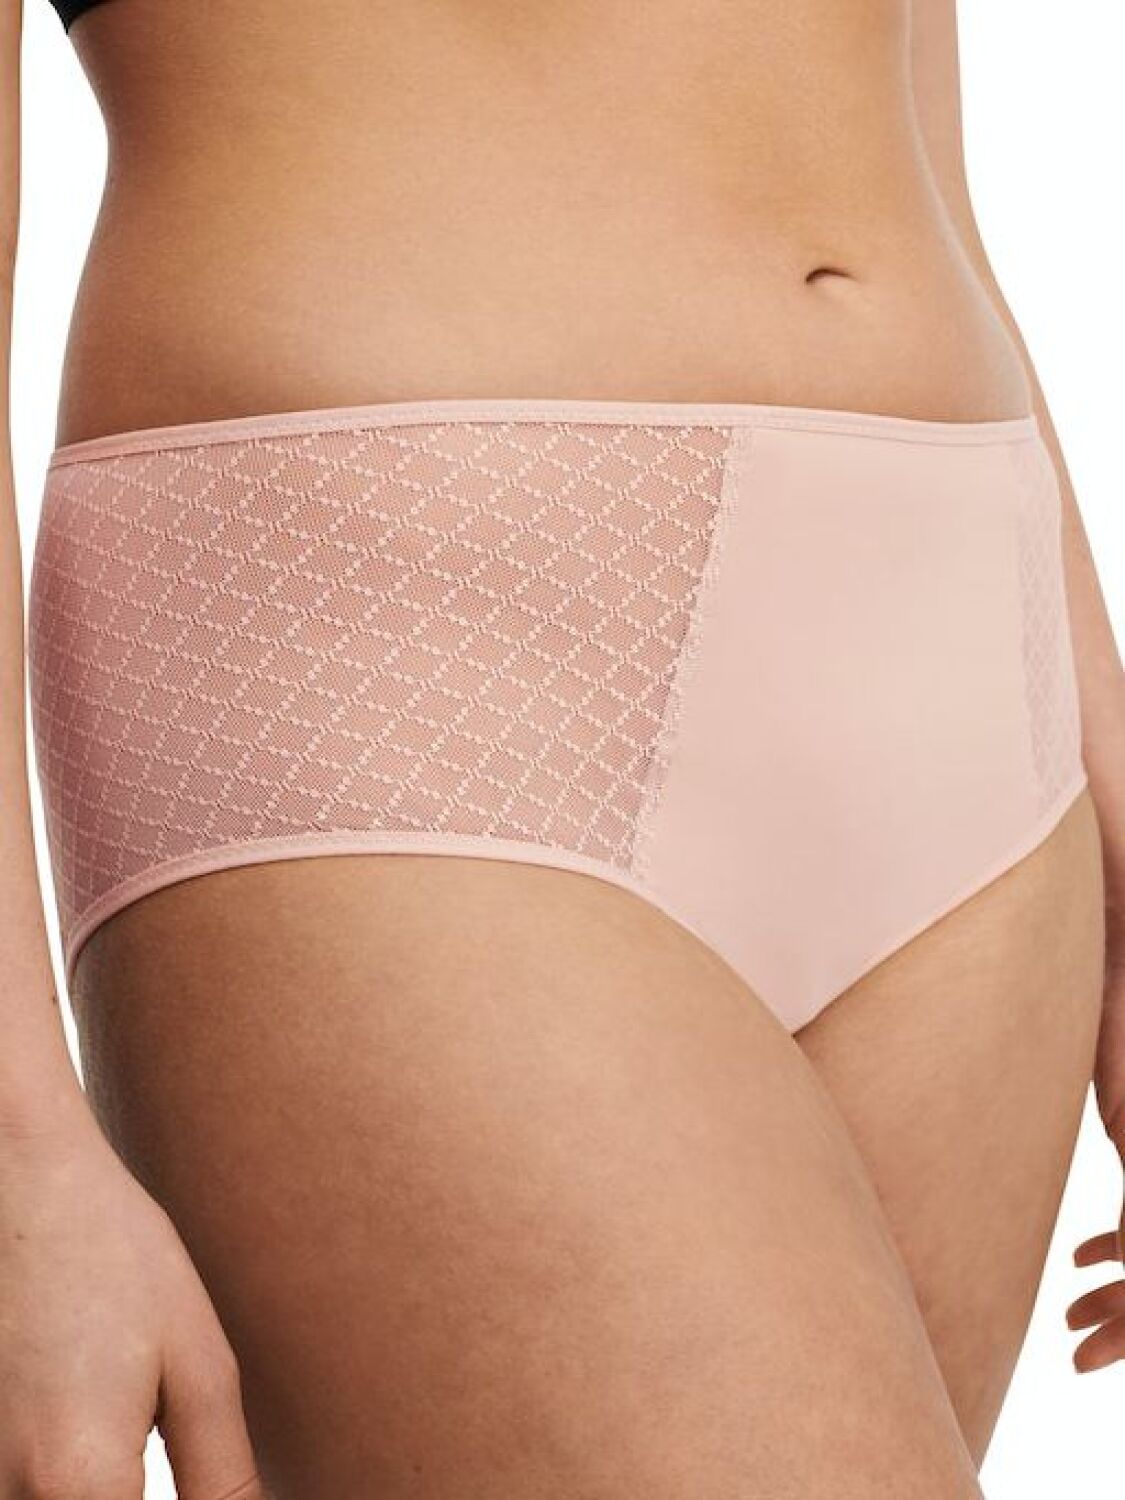 Chantelle Taillenslip Norah Chic Farbe Soft Pink